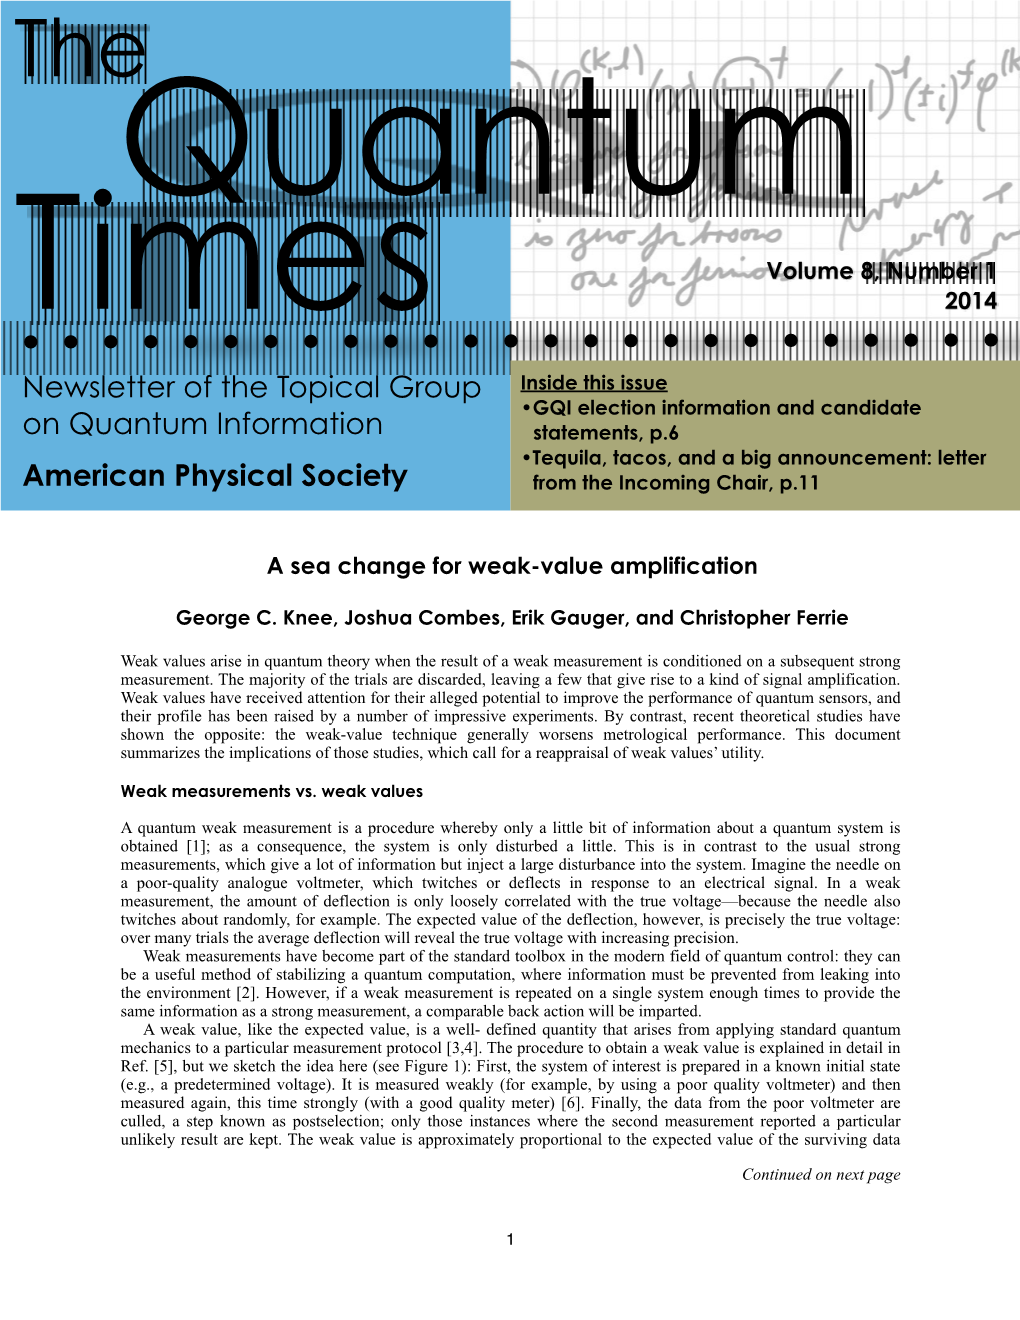 Newsletter of the Topical Group on Quantum Information American